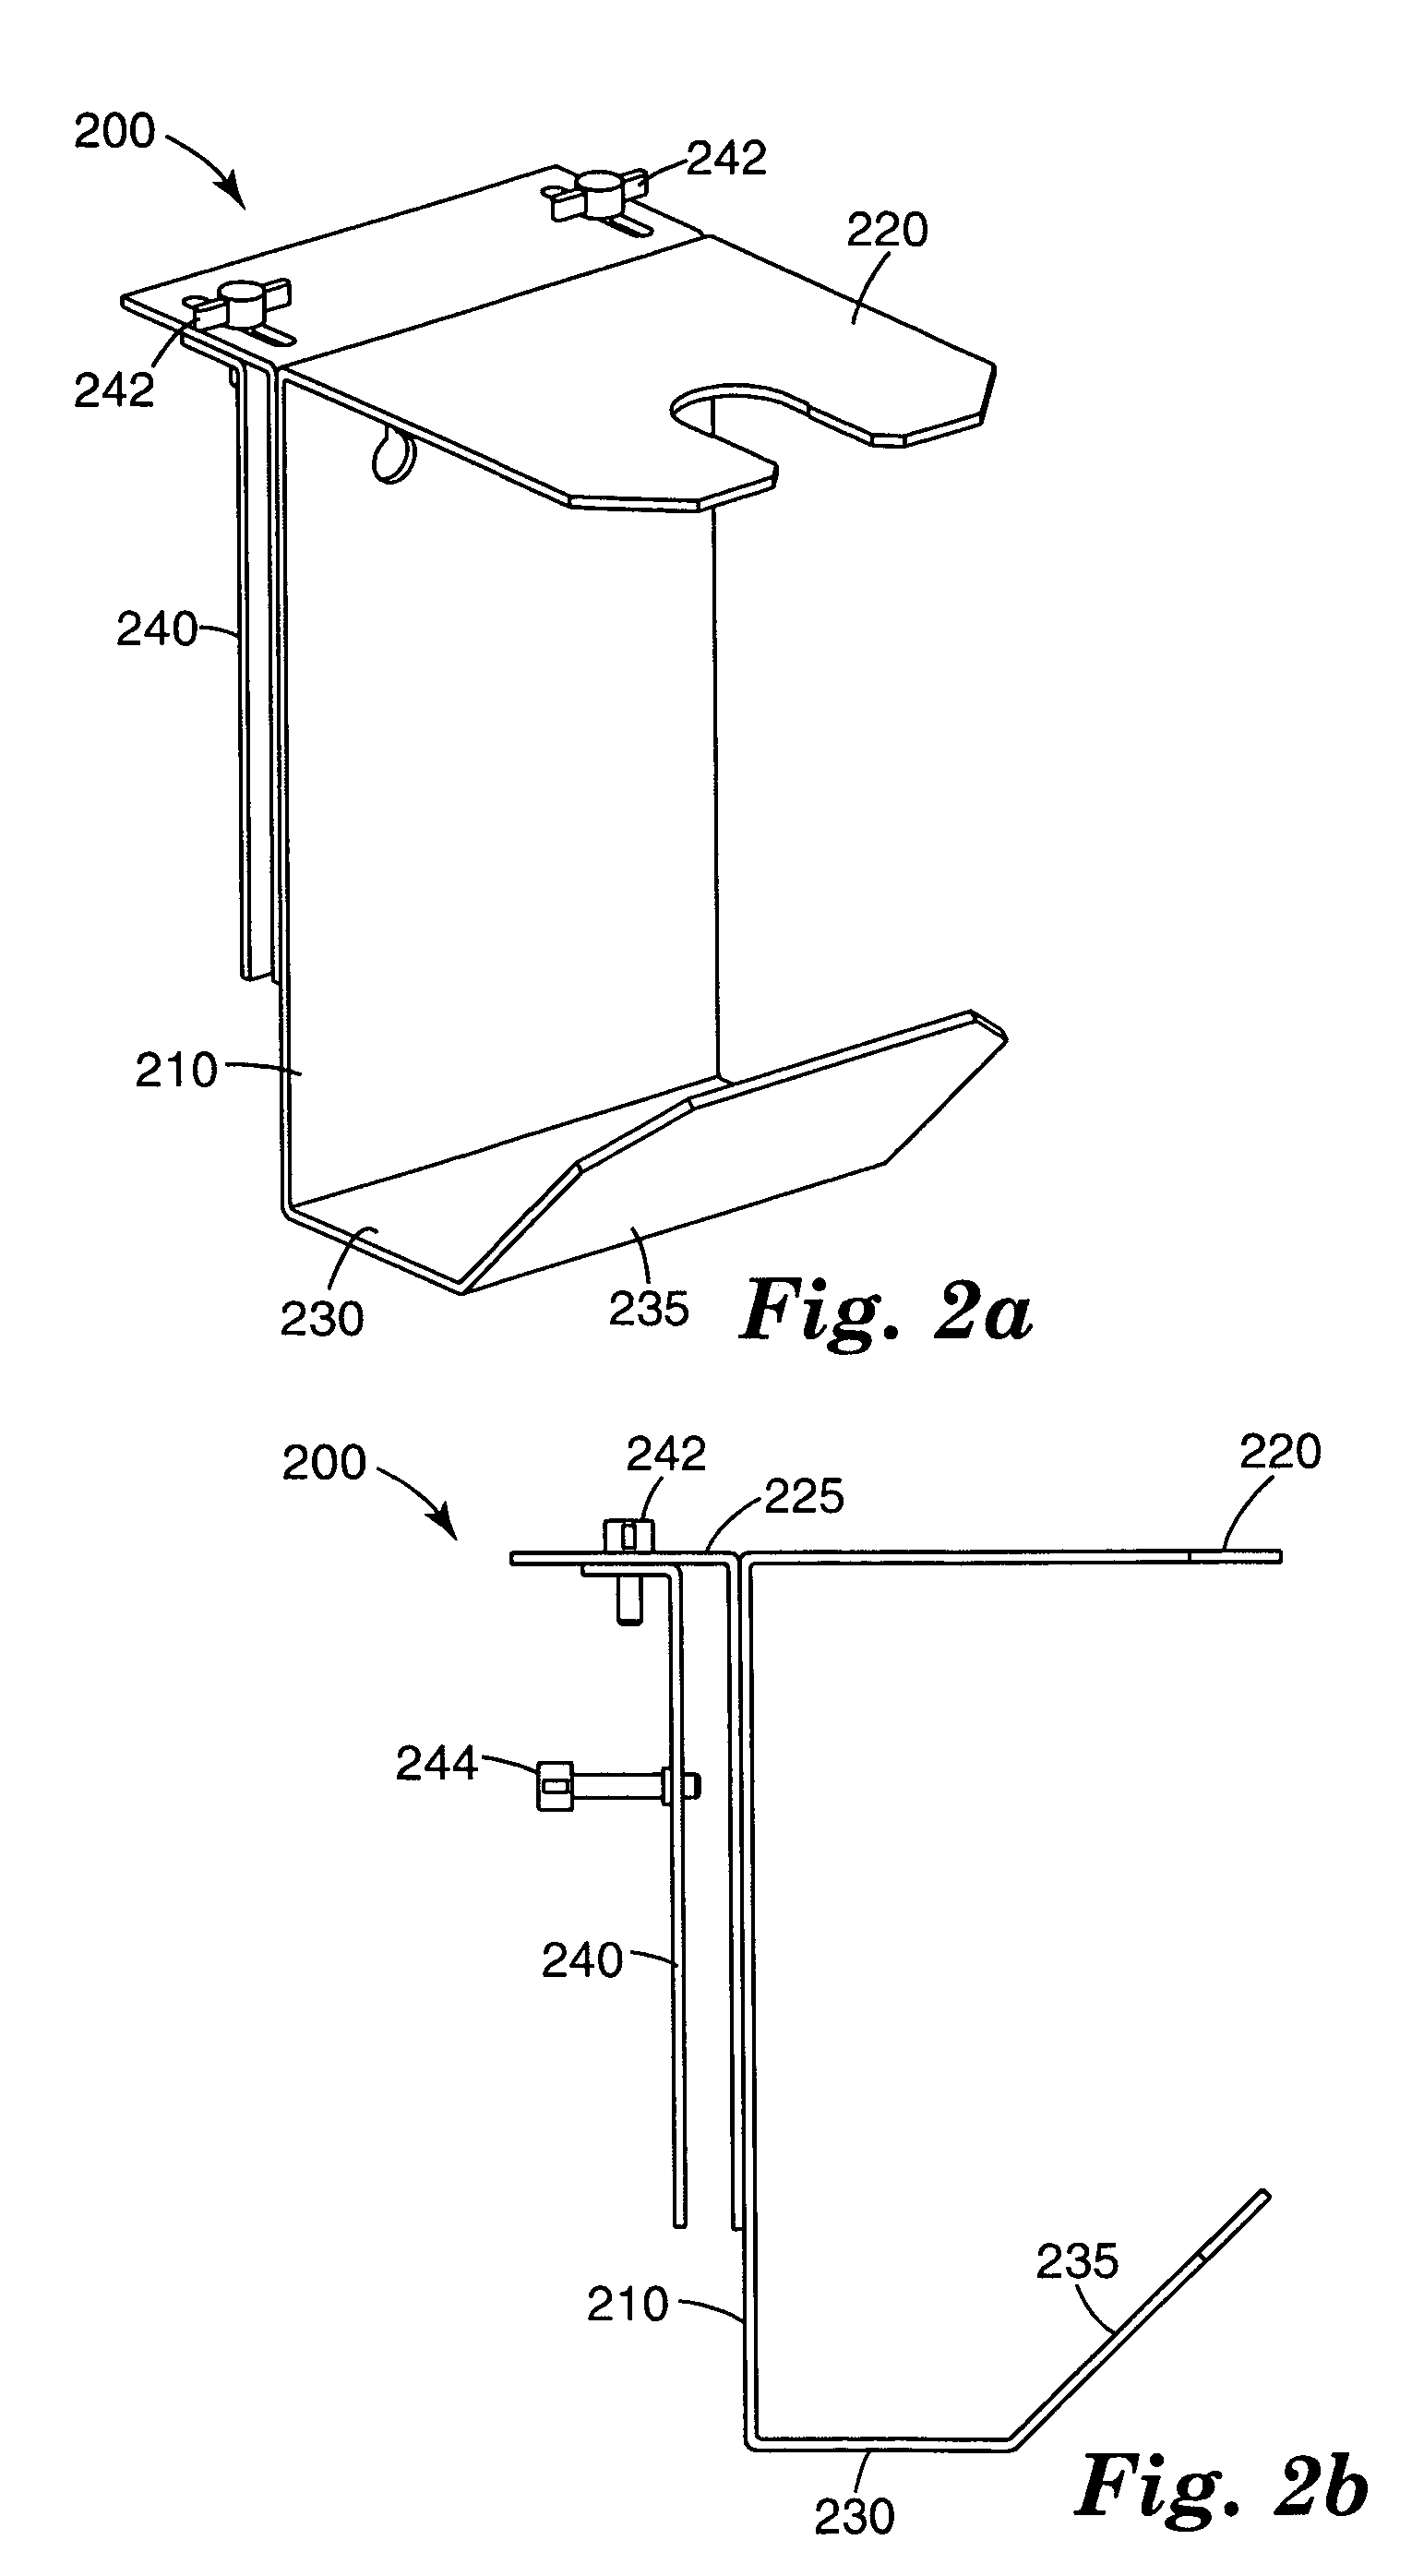 Apparatus for filling and refilling a flexible container